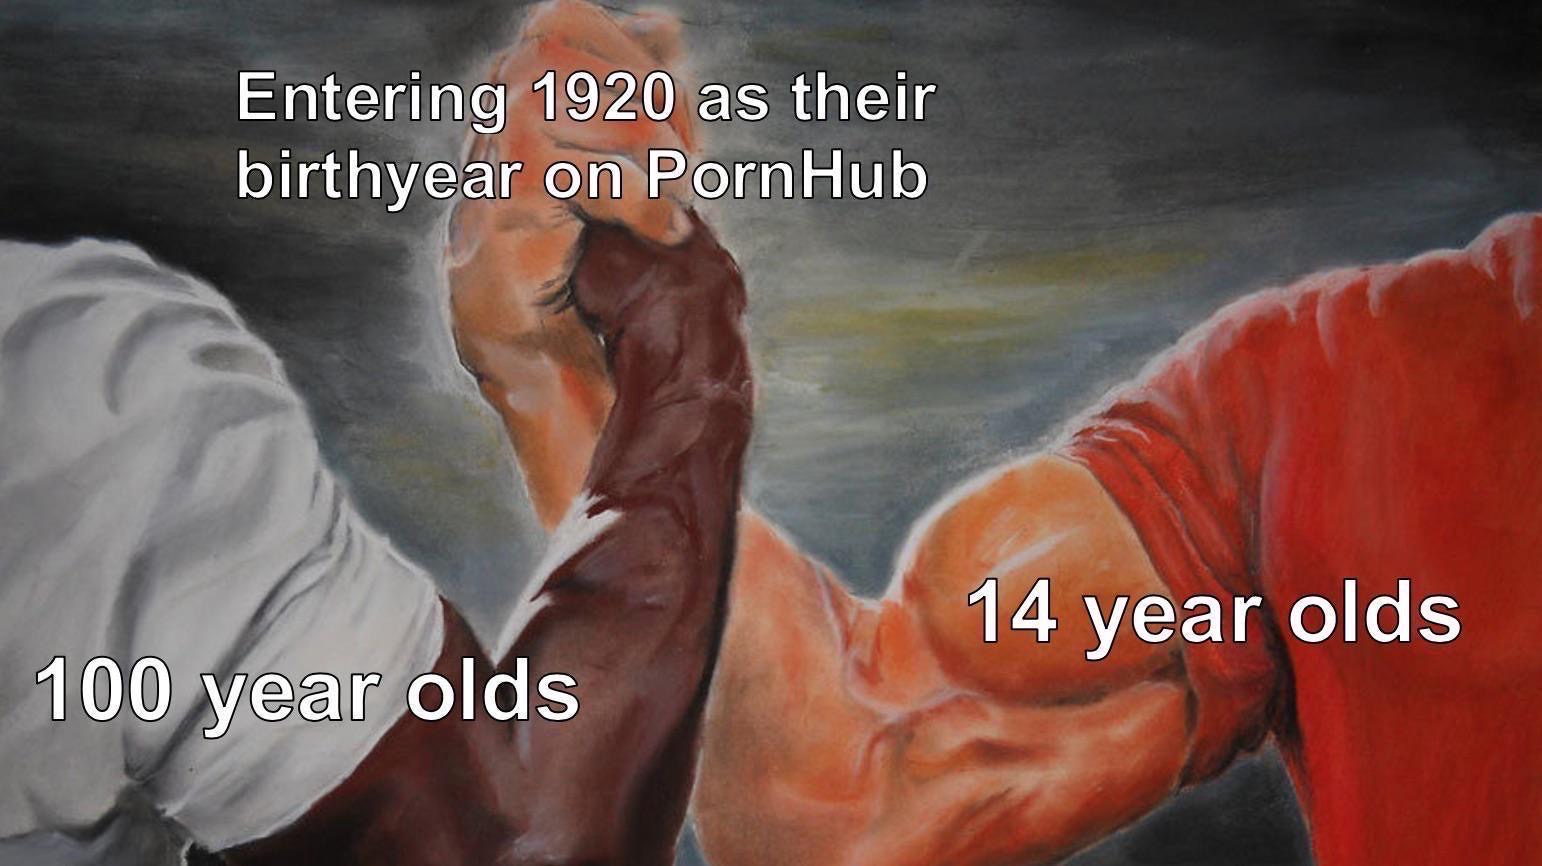 white gold concordat - Entering 1920 as their birthyear on Porn Hub 14 year olds 100 year olds